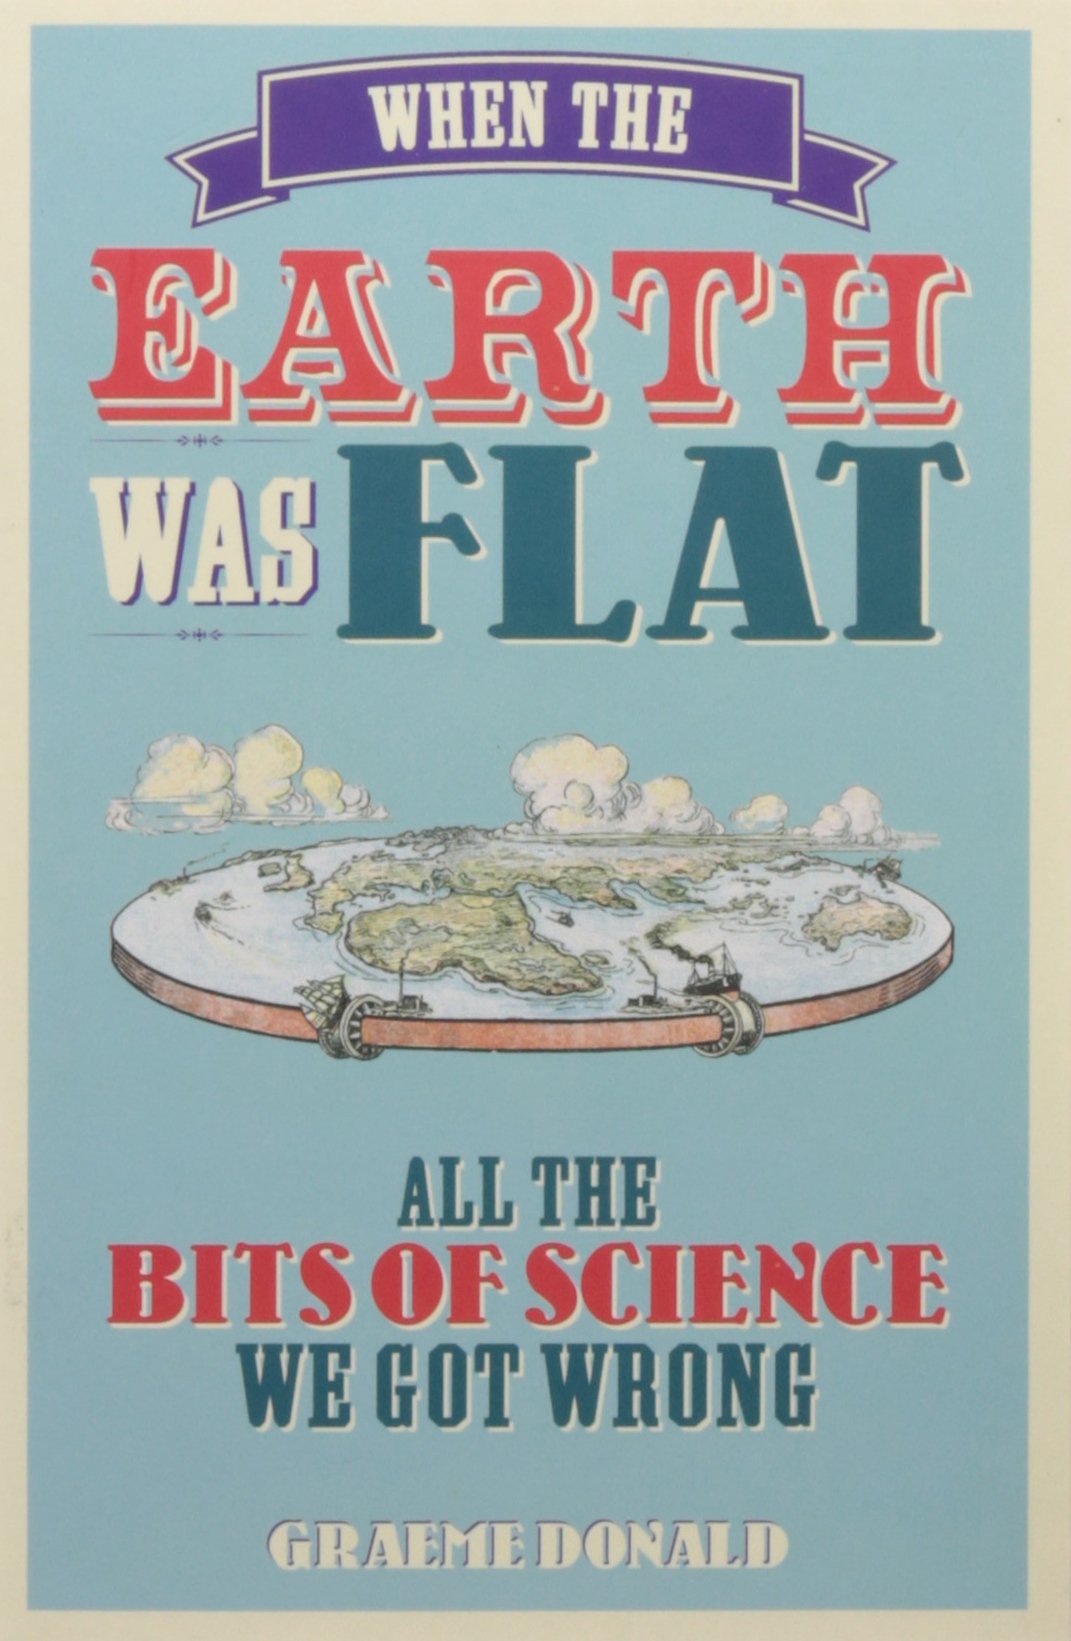 WHEN THE EARTH WAS FLAT: ALL THE BITS OF SCIENCE WE GOT WRONG